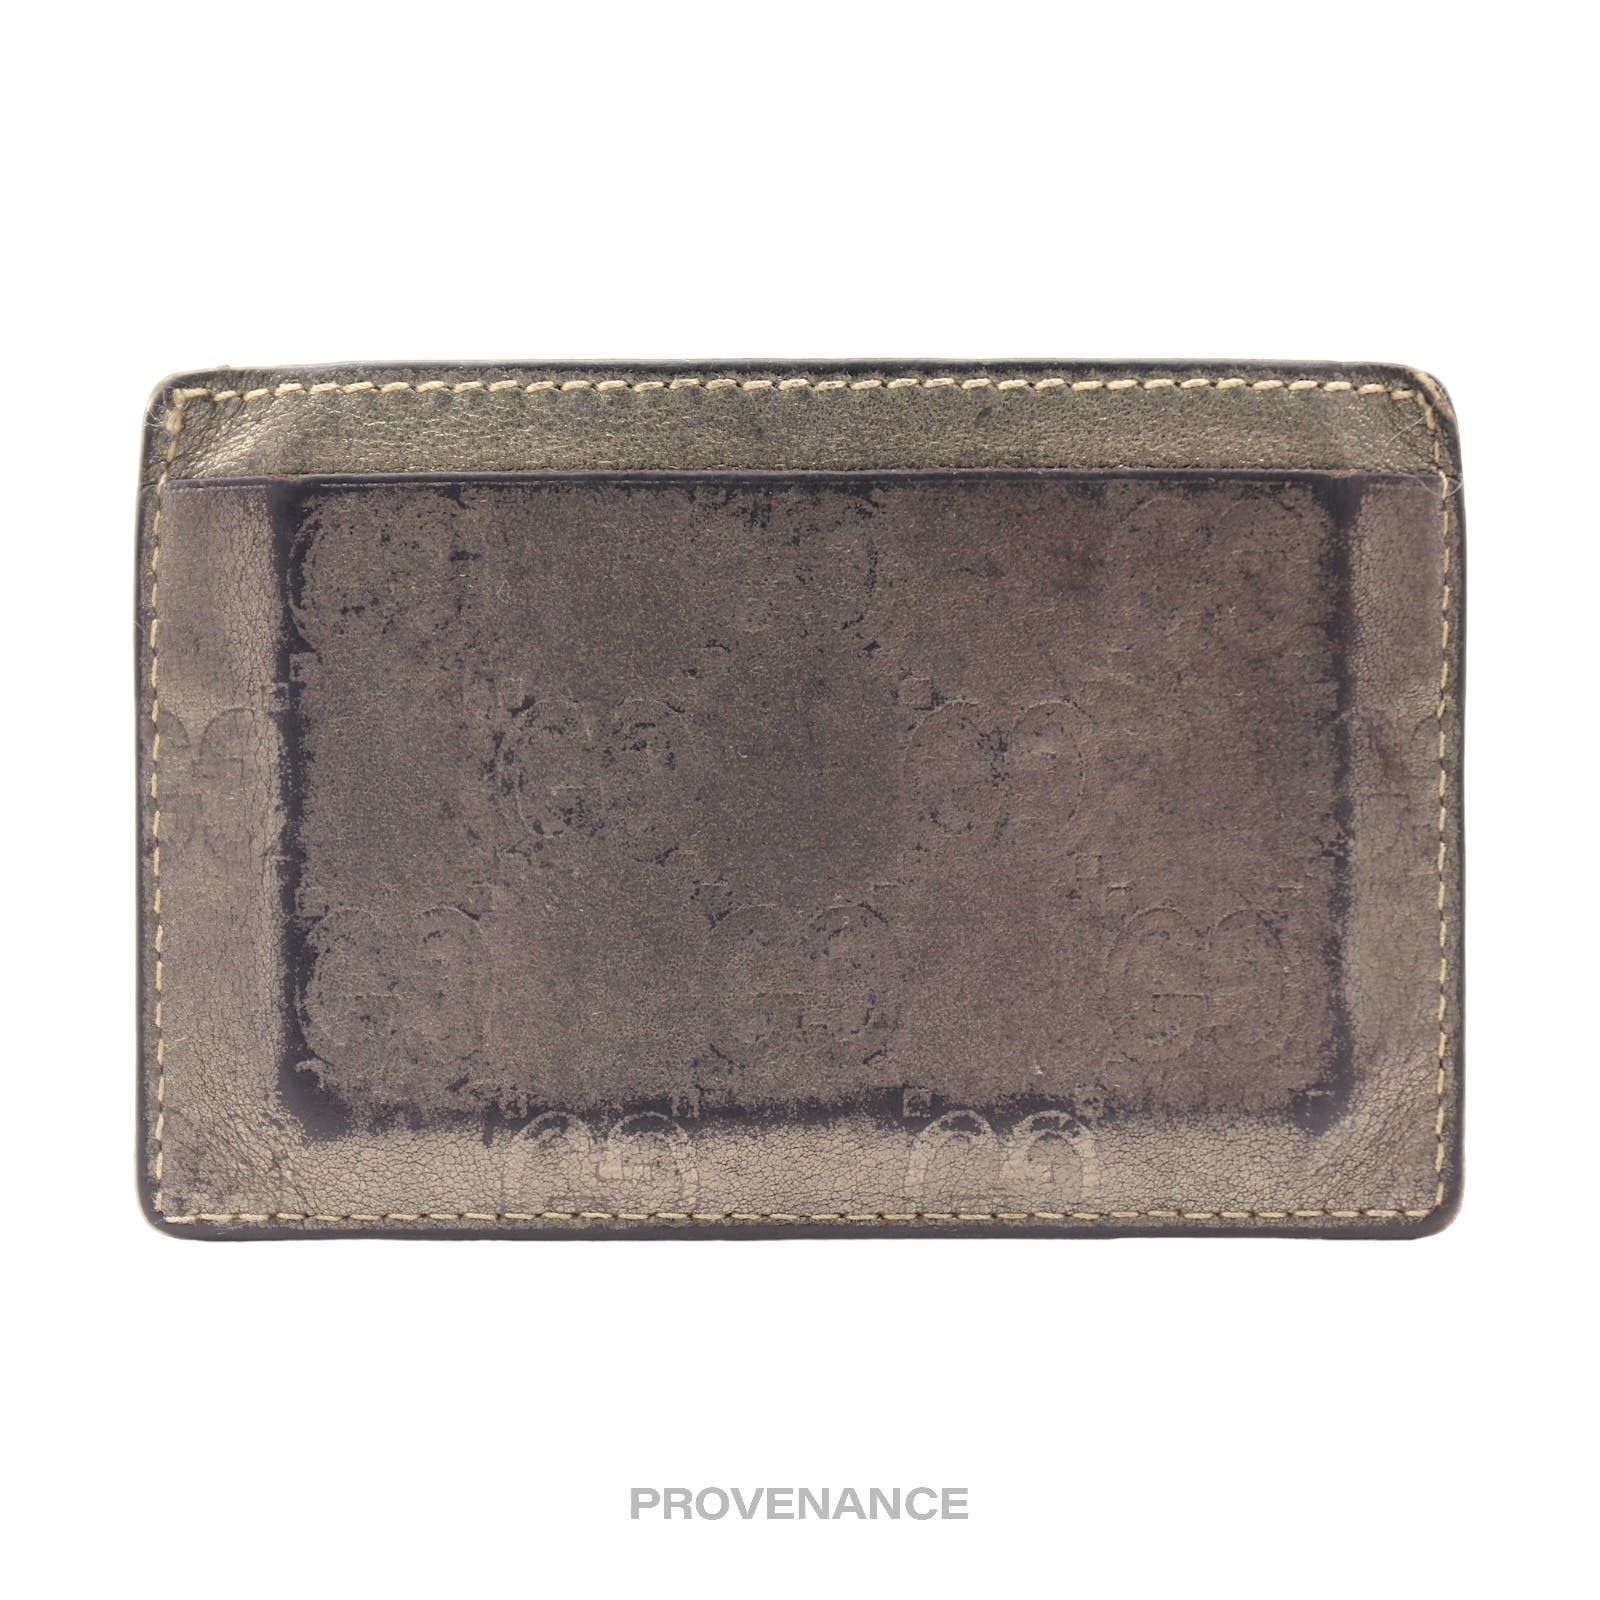 Gucci 🔴 Gucci Card Holder Wallet - Metallic Bronze Guccissima Size ONE SIZE - 2 Preview